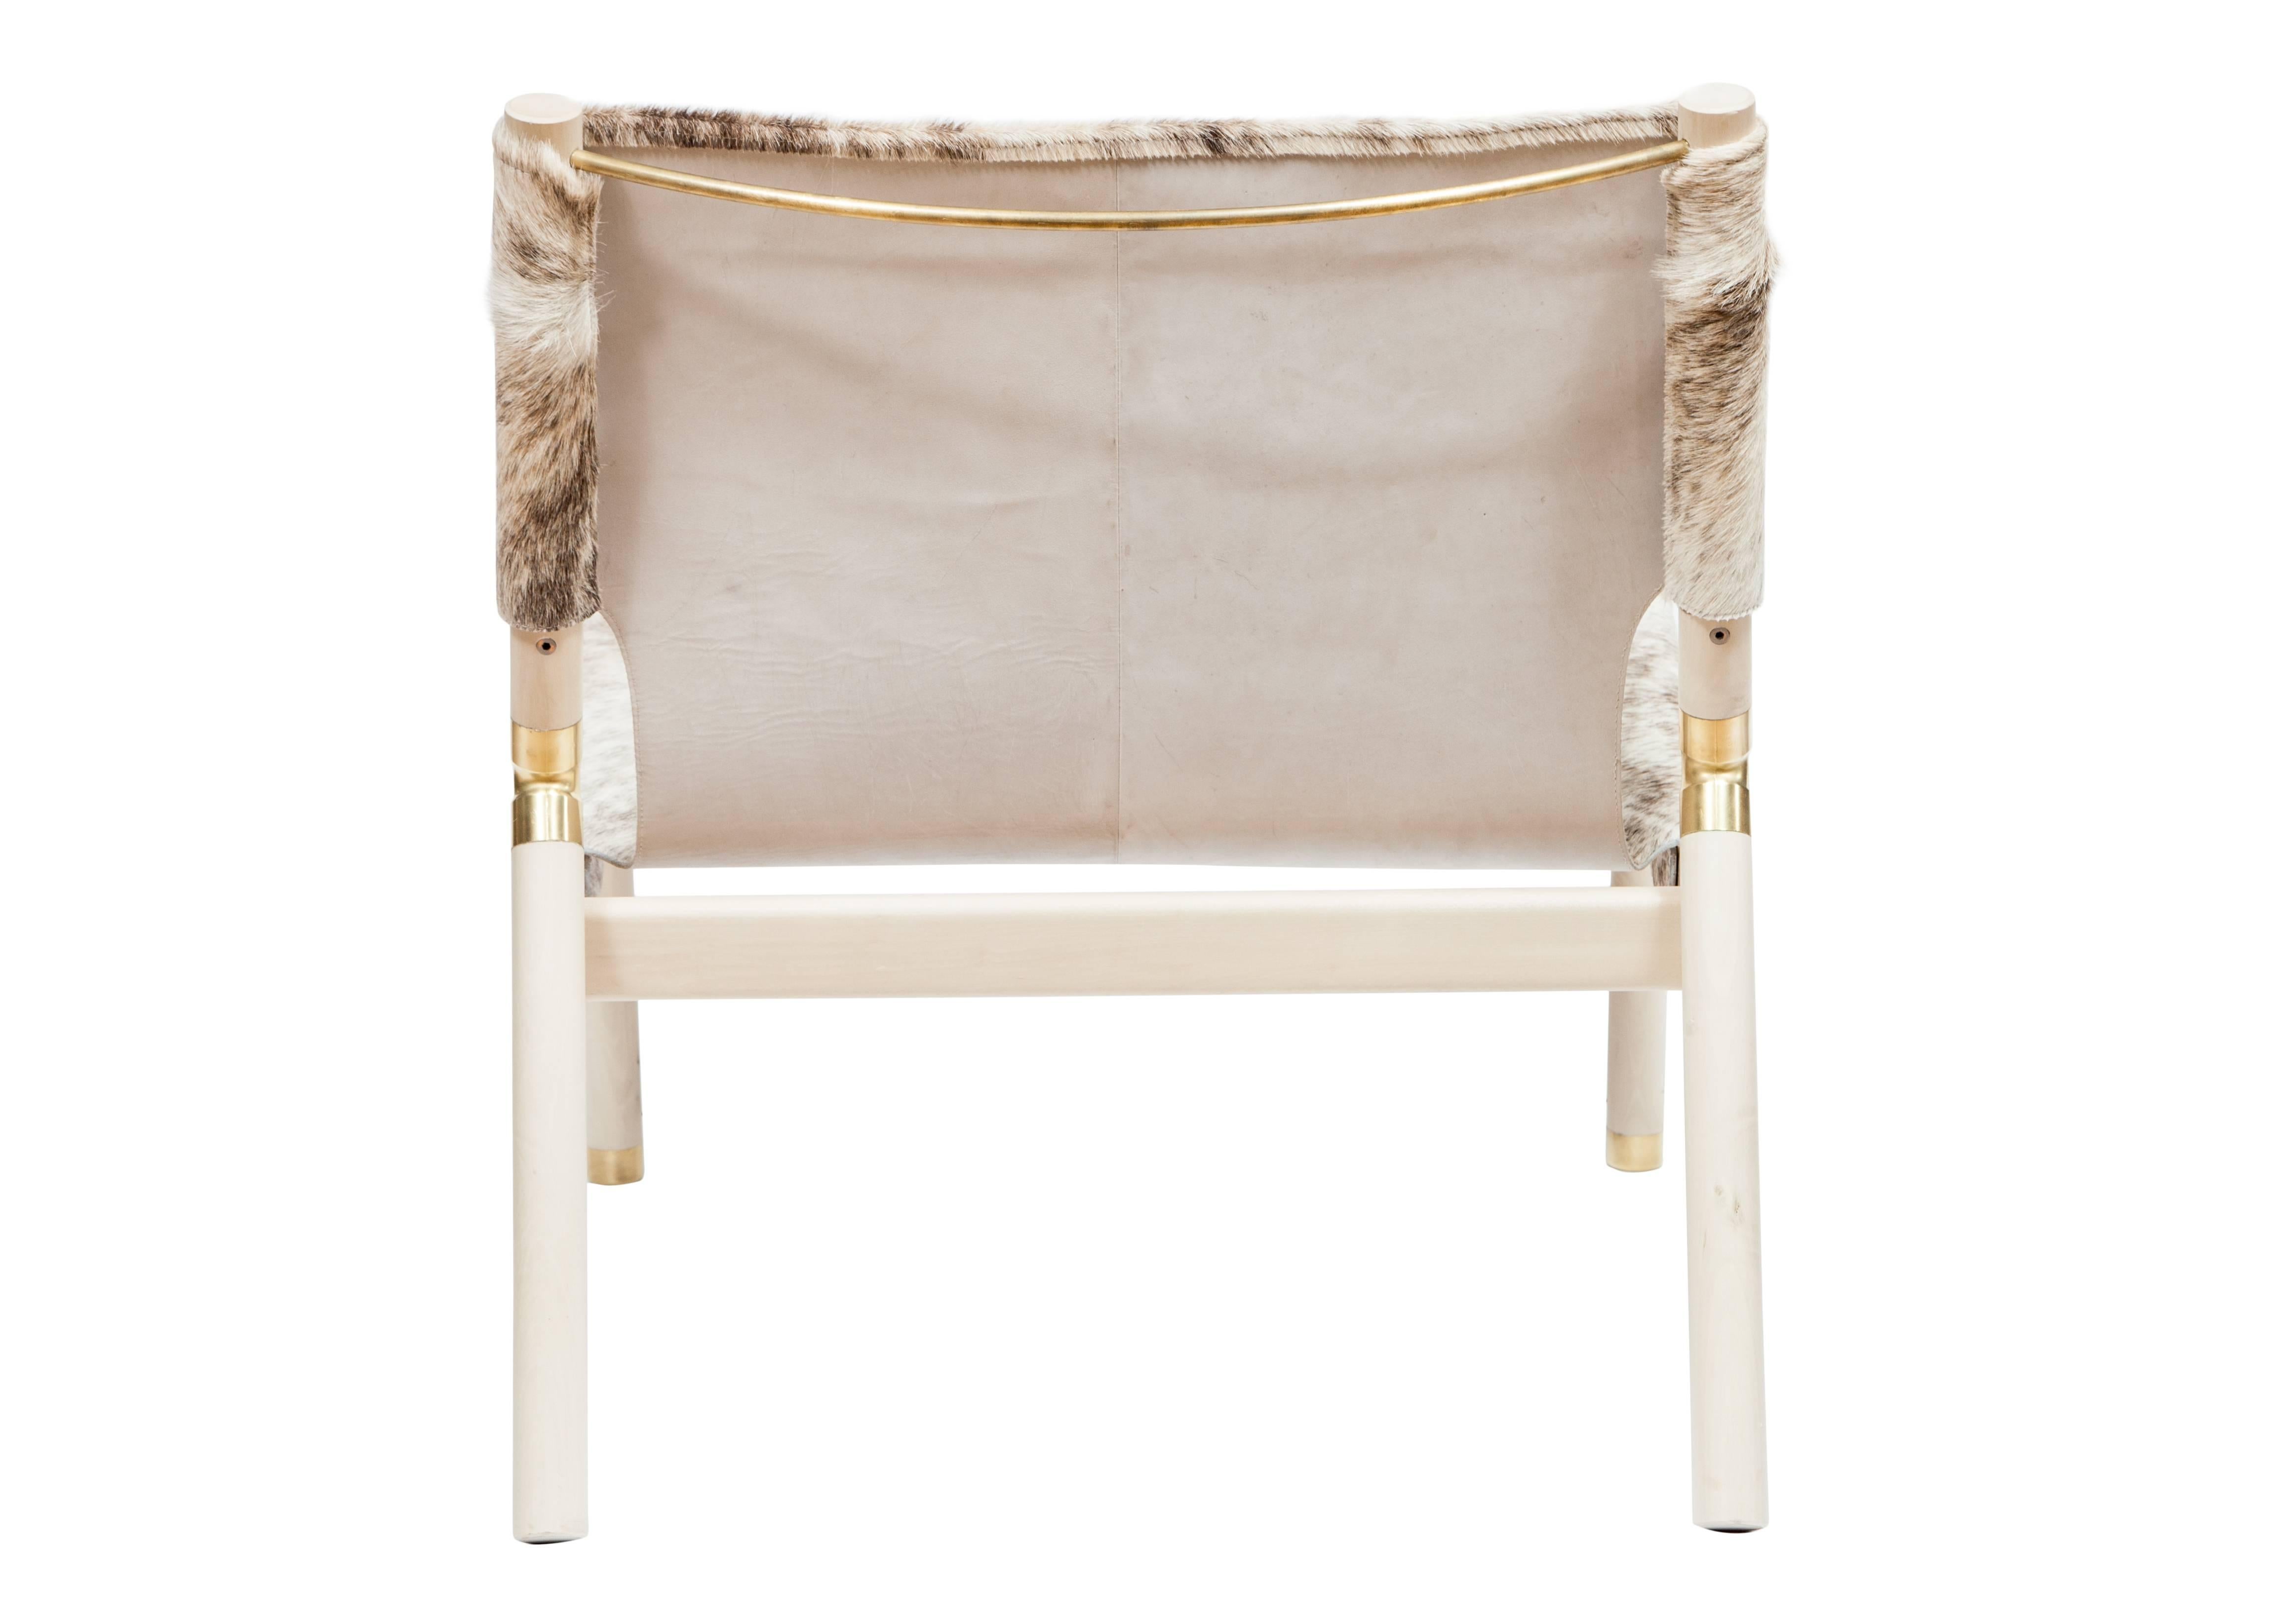 Erickson Aesthetics Slung Brindle Hide Holly Lounge Chair In Excellent Condition For Sale In New York, NY